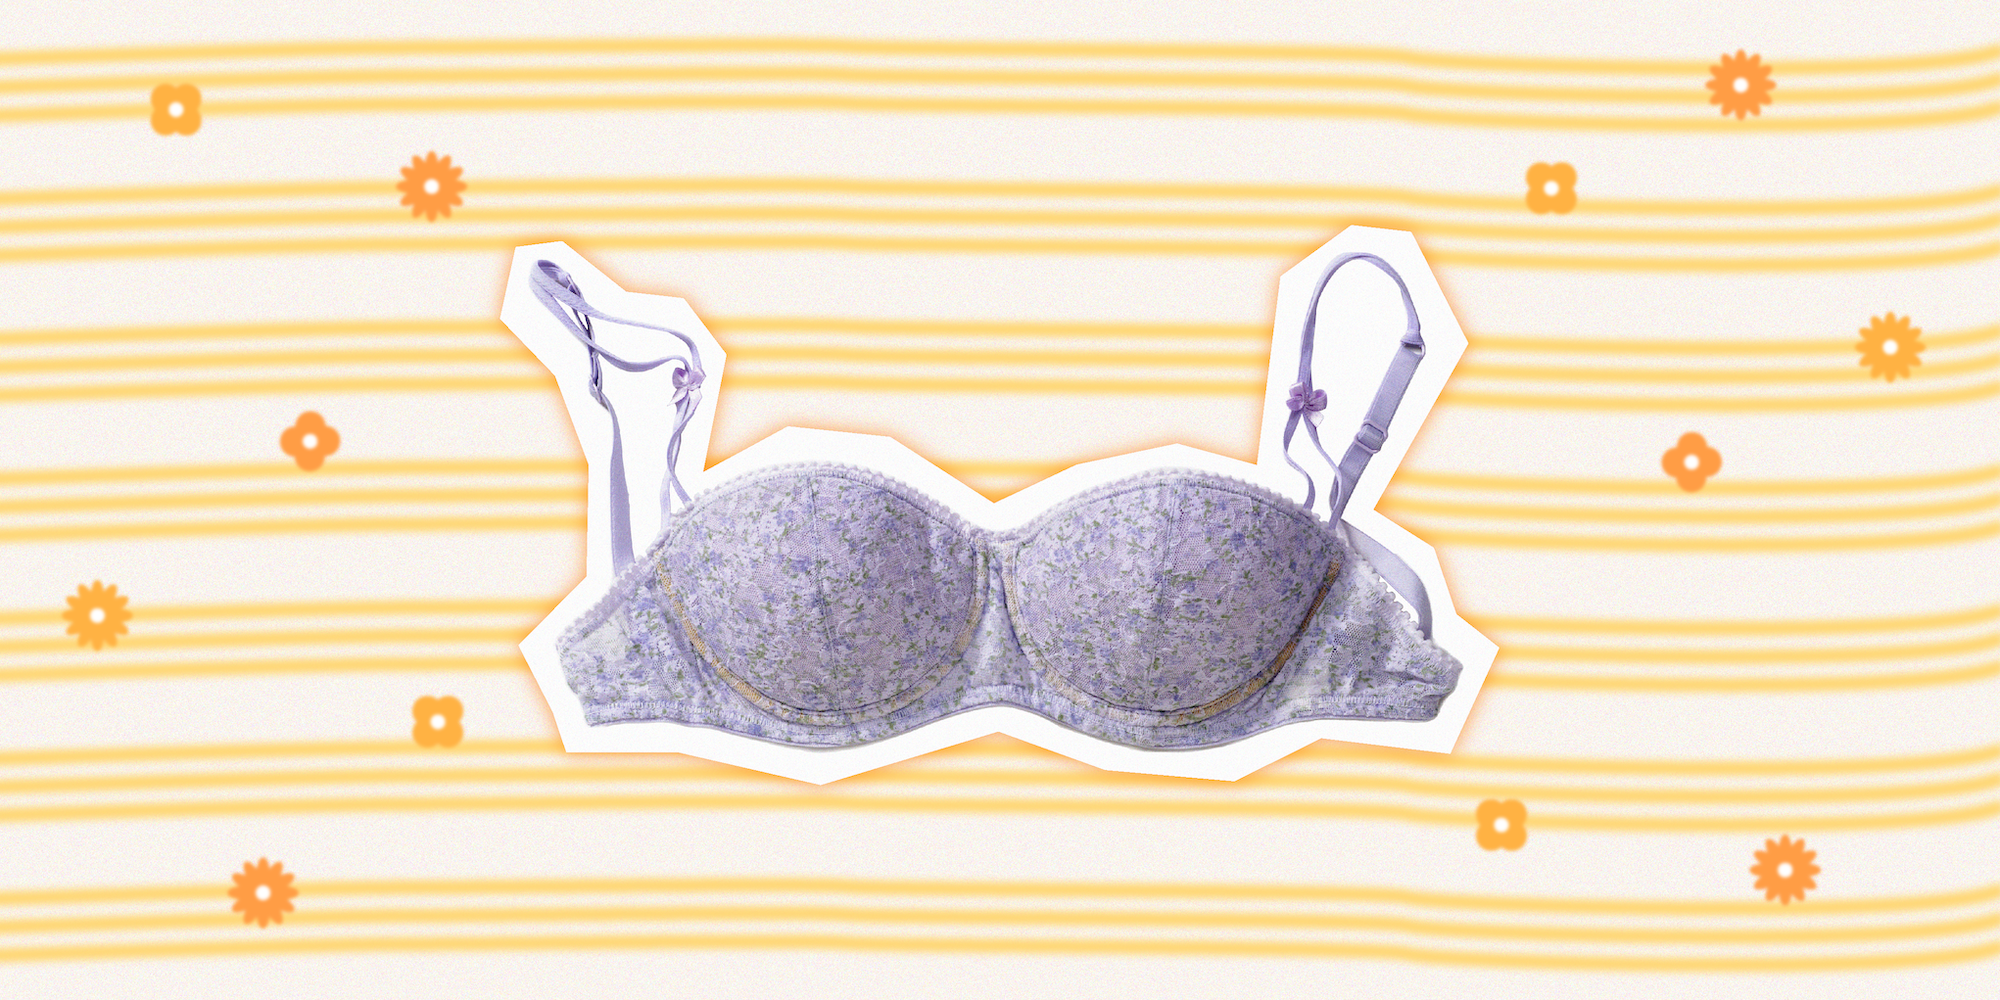 Having a larger chest doesn't have to be torture, you just need the right  bra ✨ [Video]